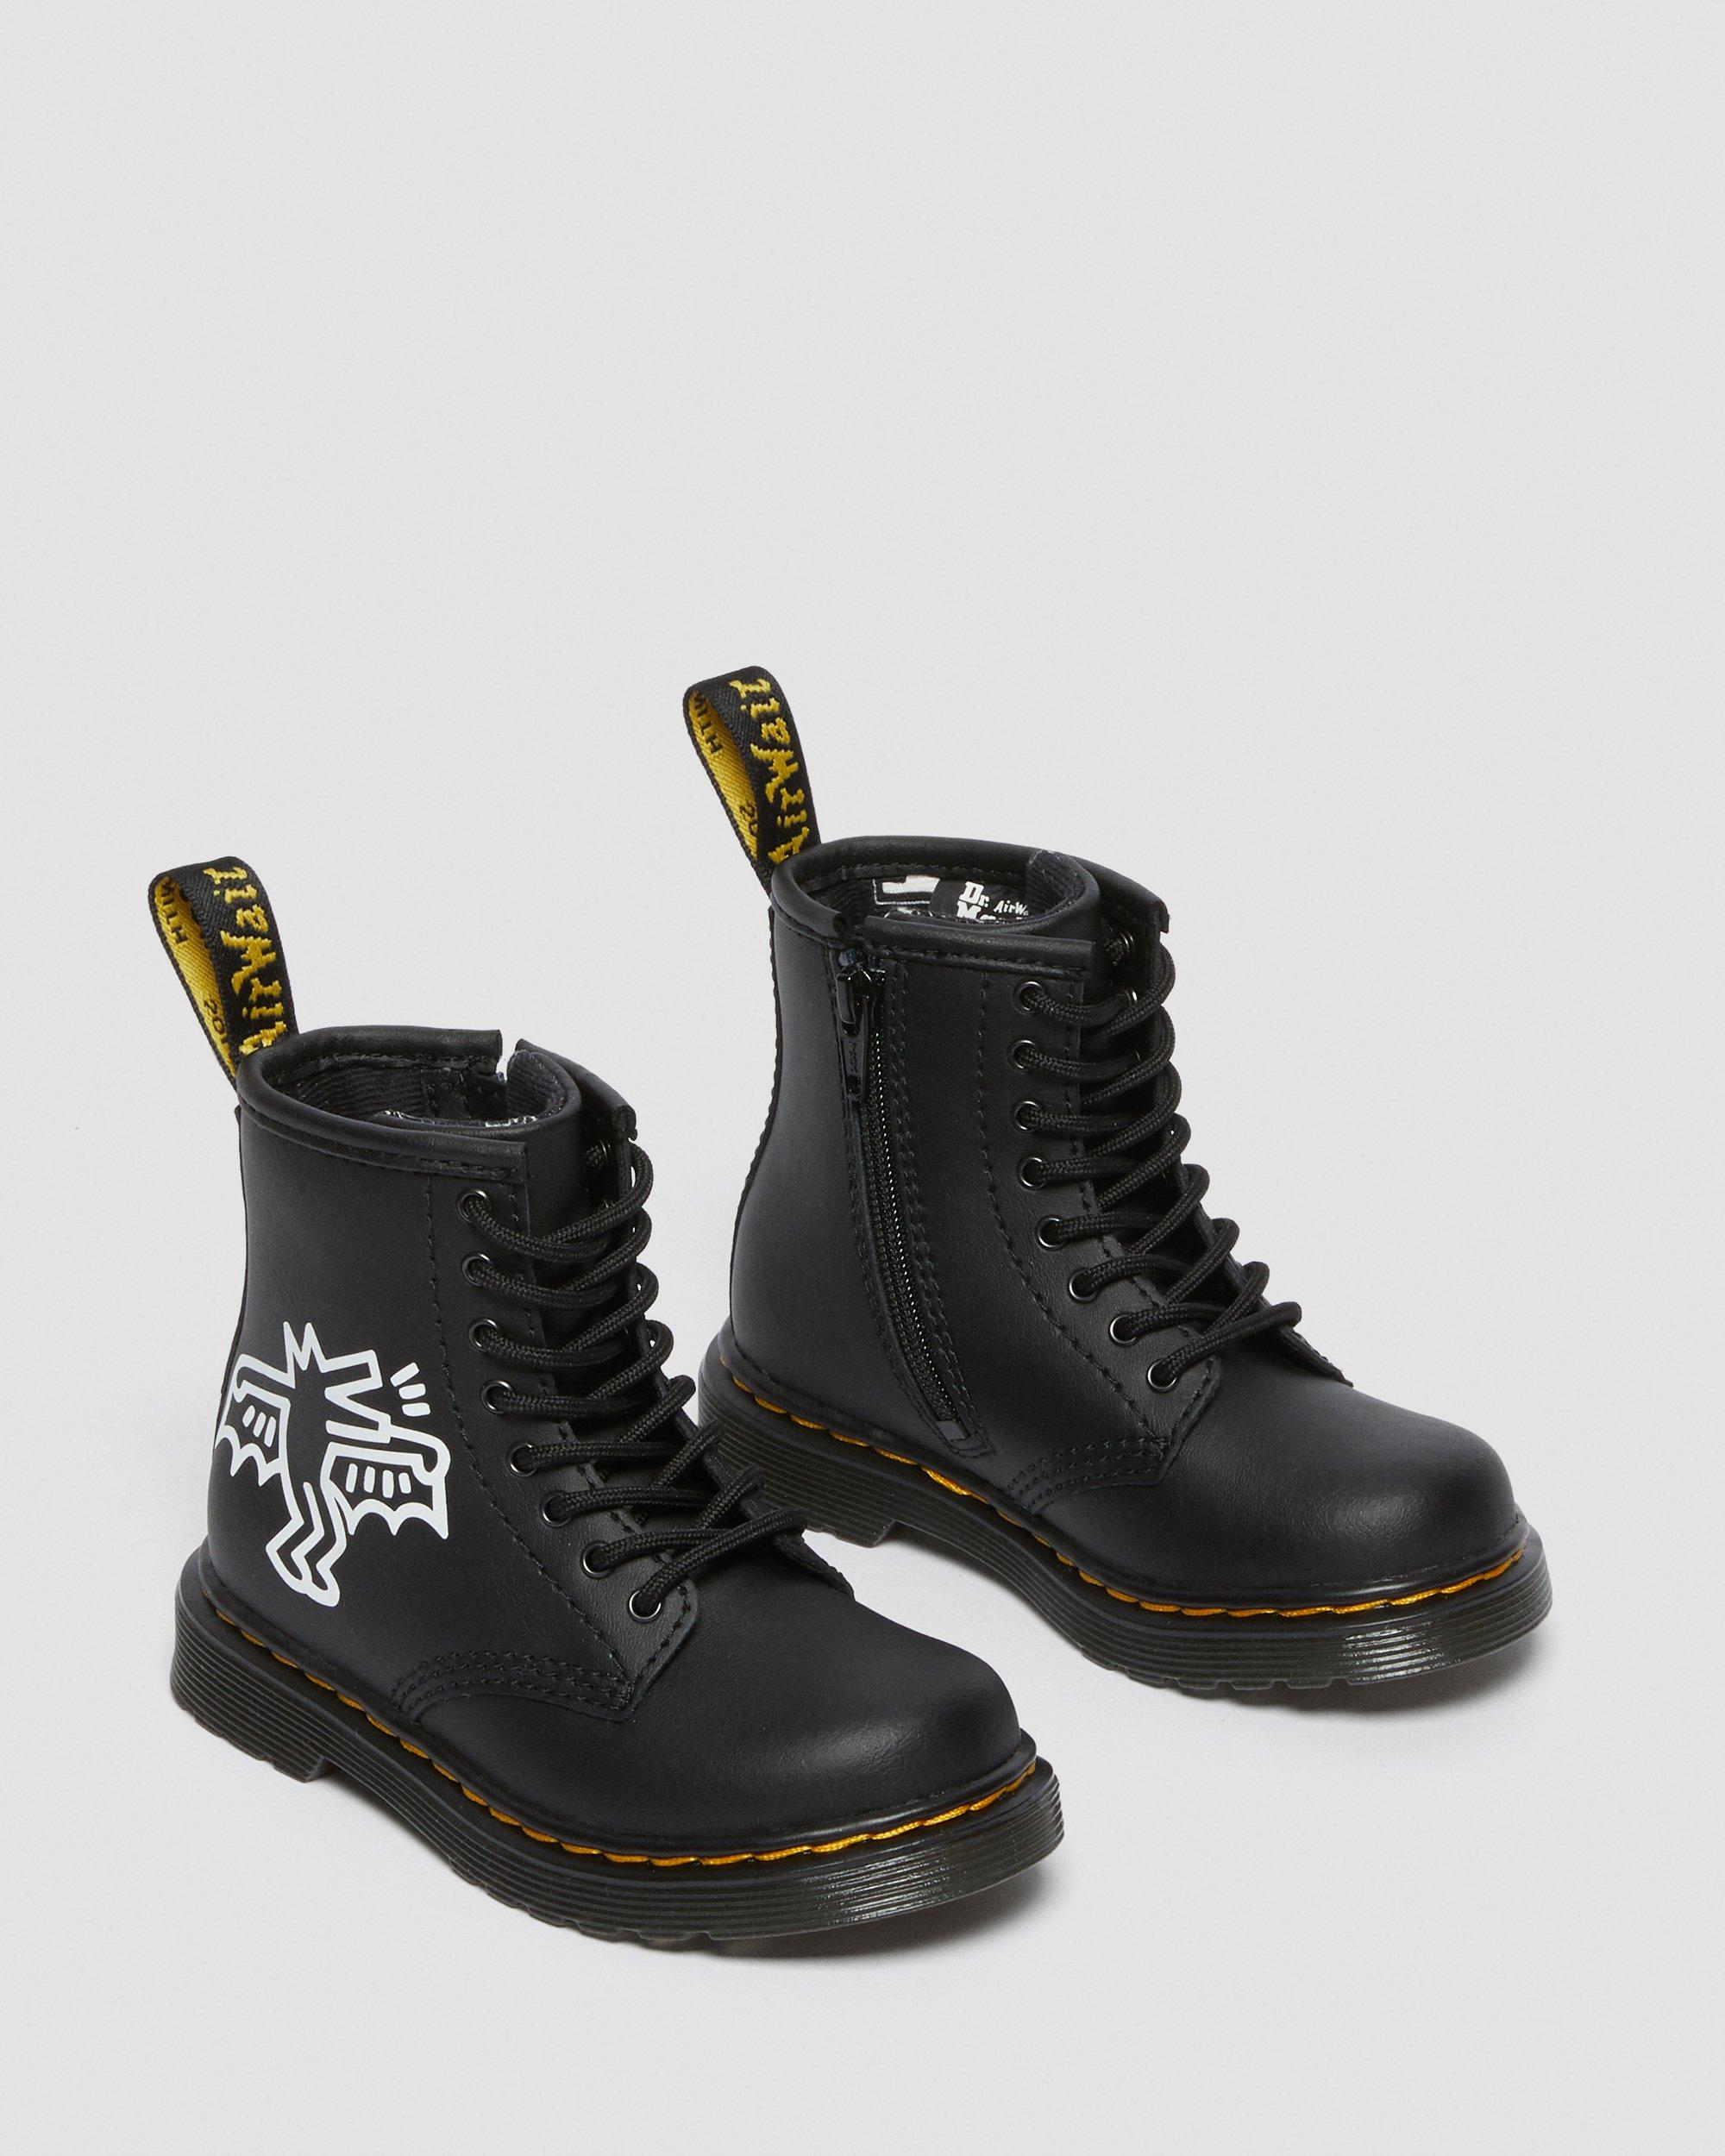 Toddler 1460 Keith Haring Leather Boots in Black+White